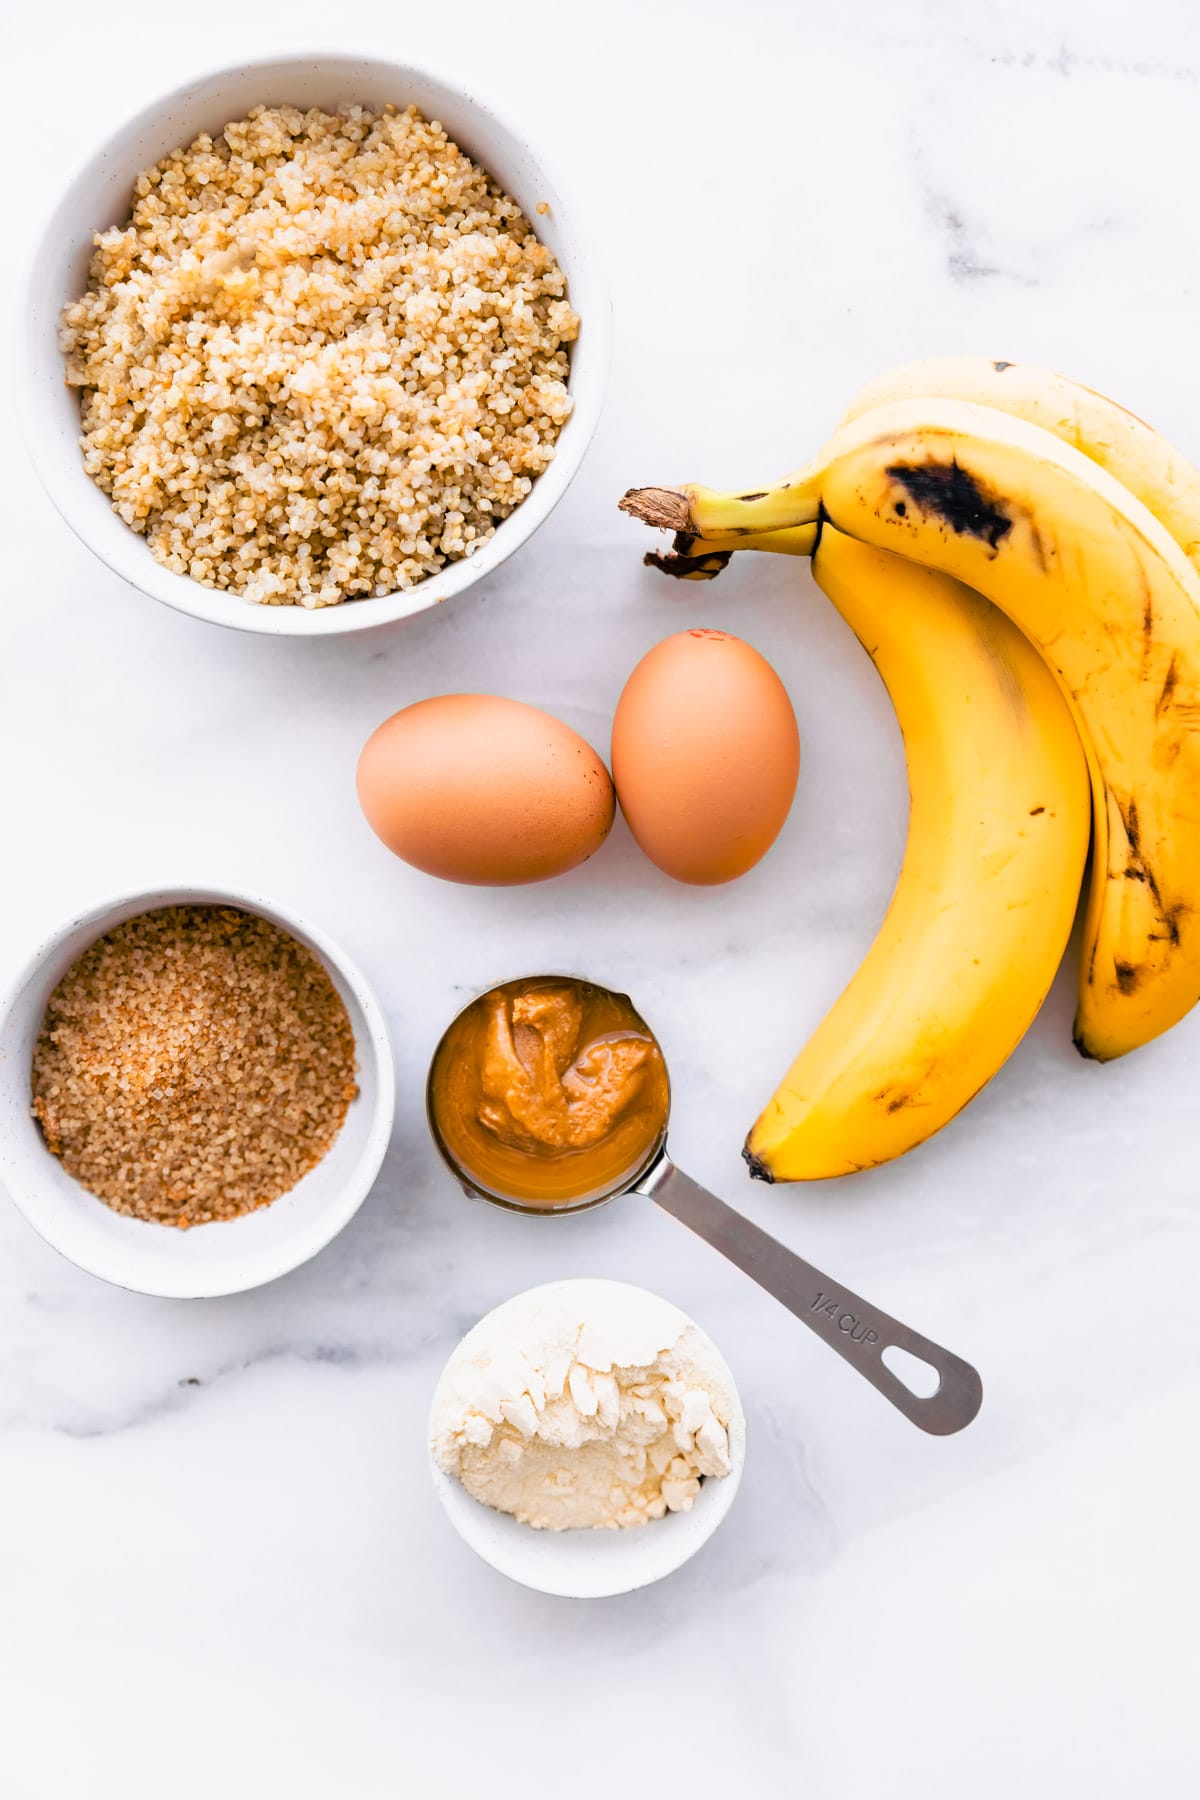 ingredients for gluten free banana bread arranged together with white background